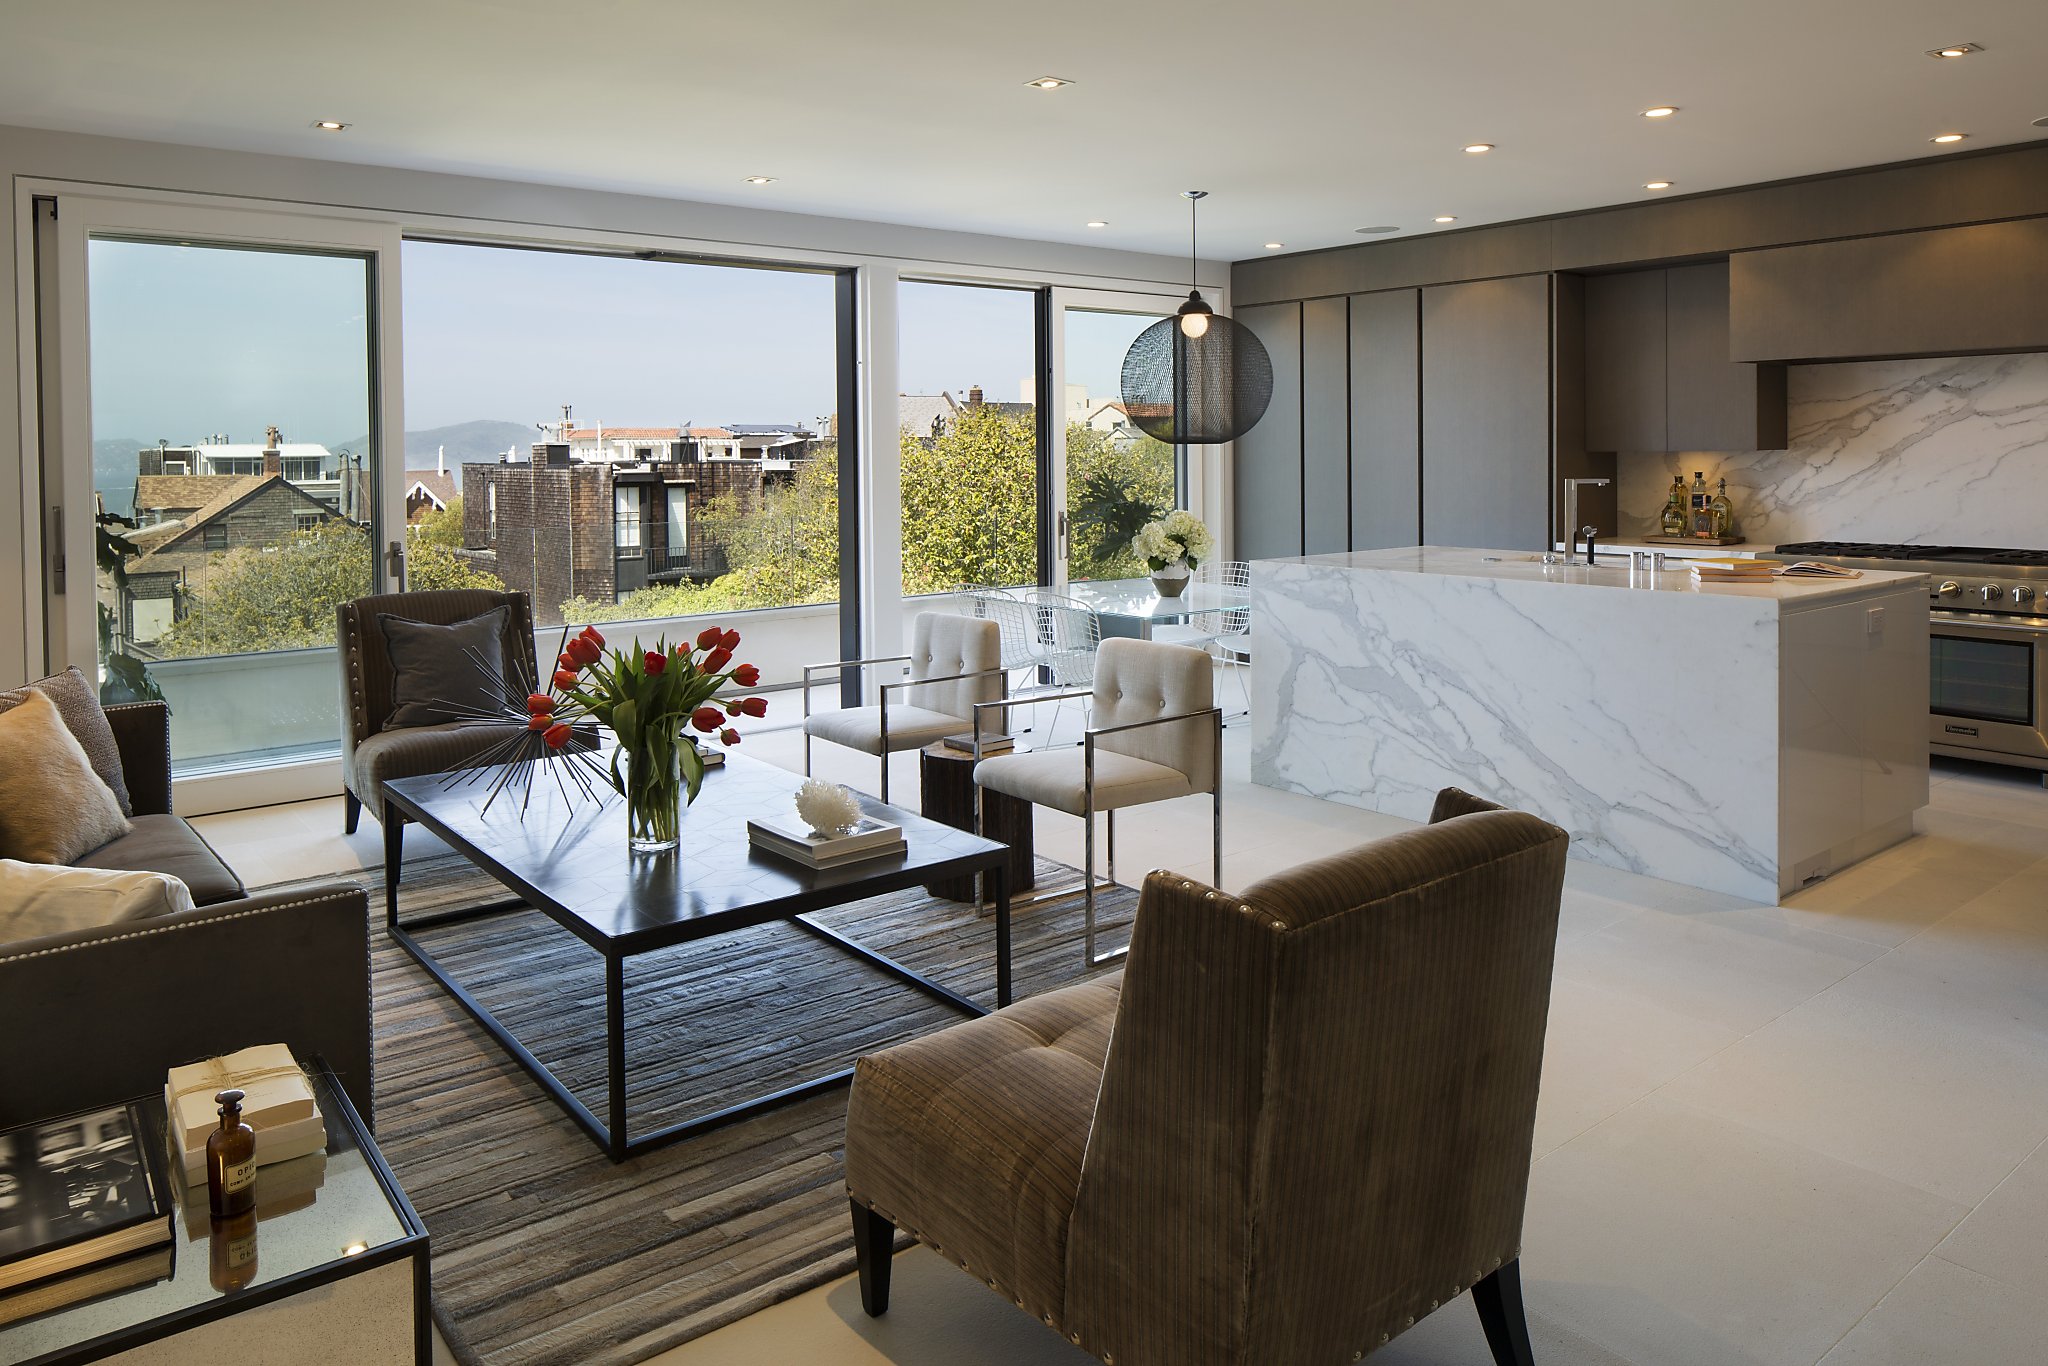 Pacific Heights contemporary is epitome of sustainable luxury